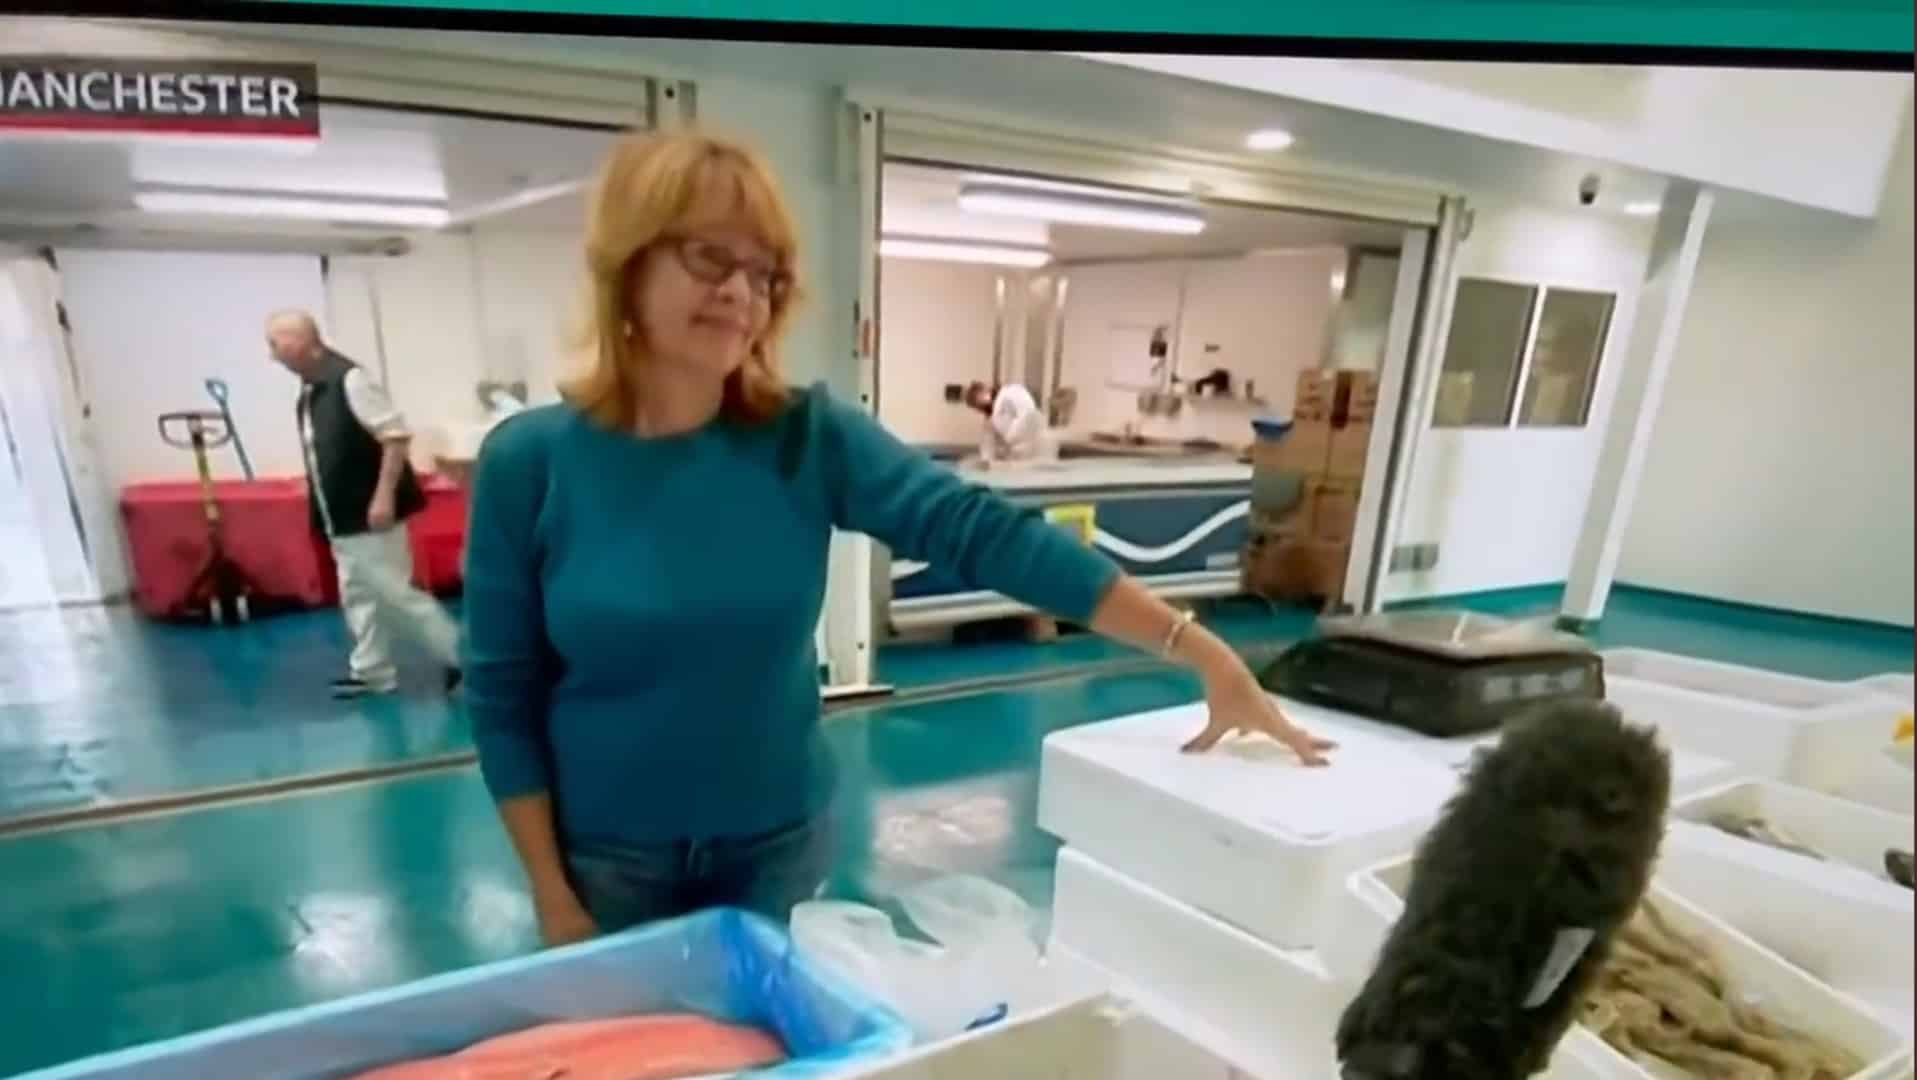 Trader blames Brexit for soaring price of fish – but BBC edits it out